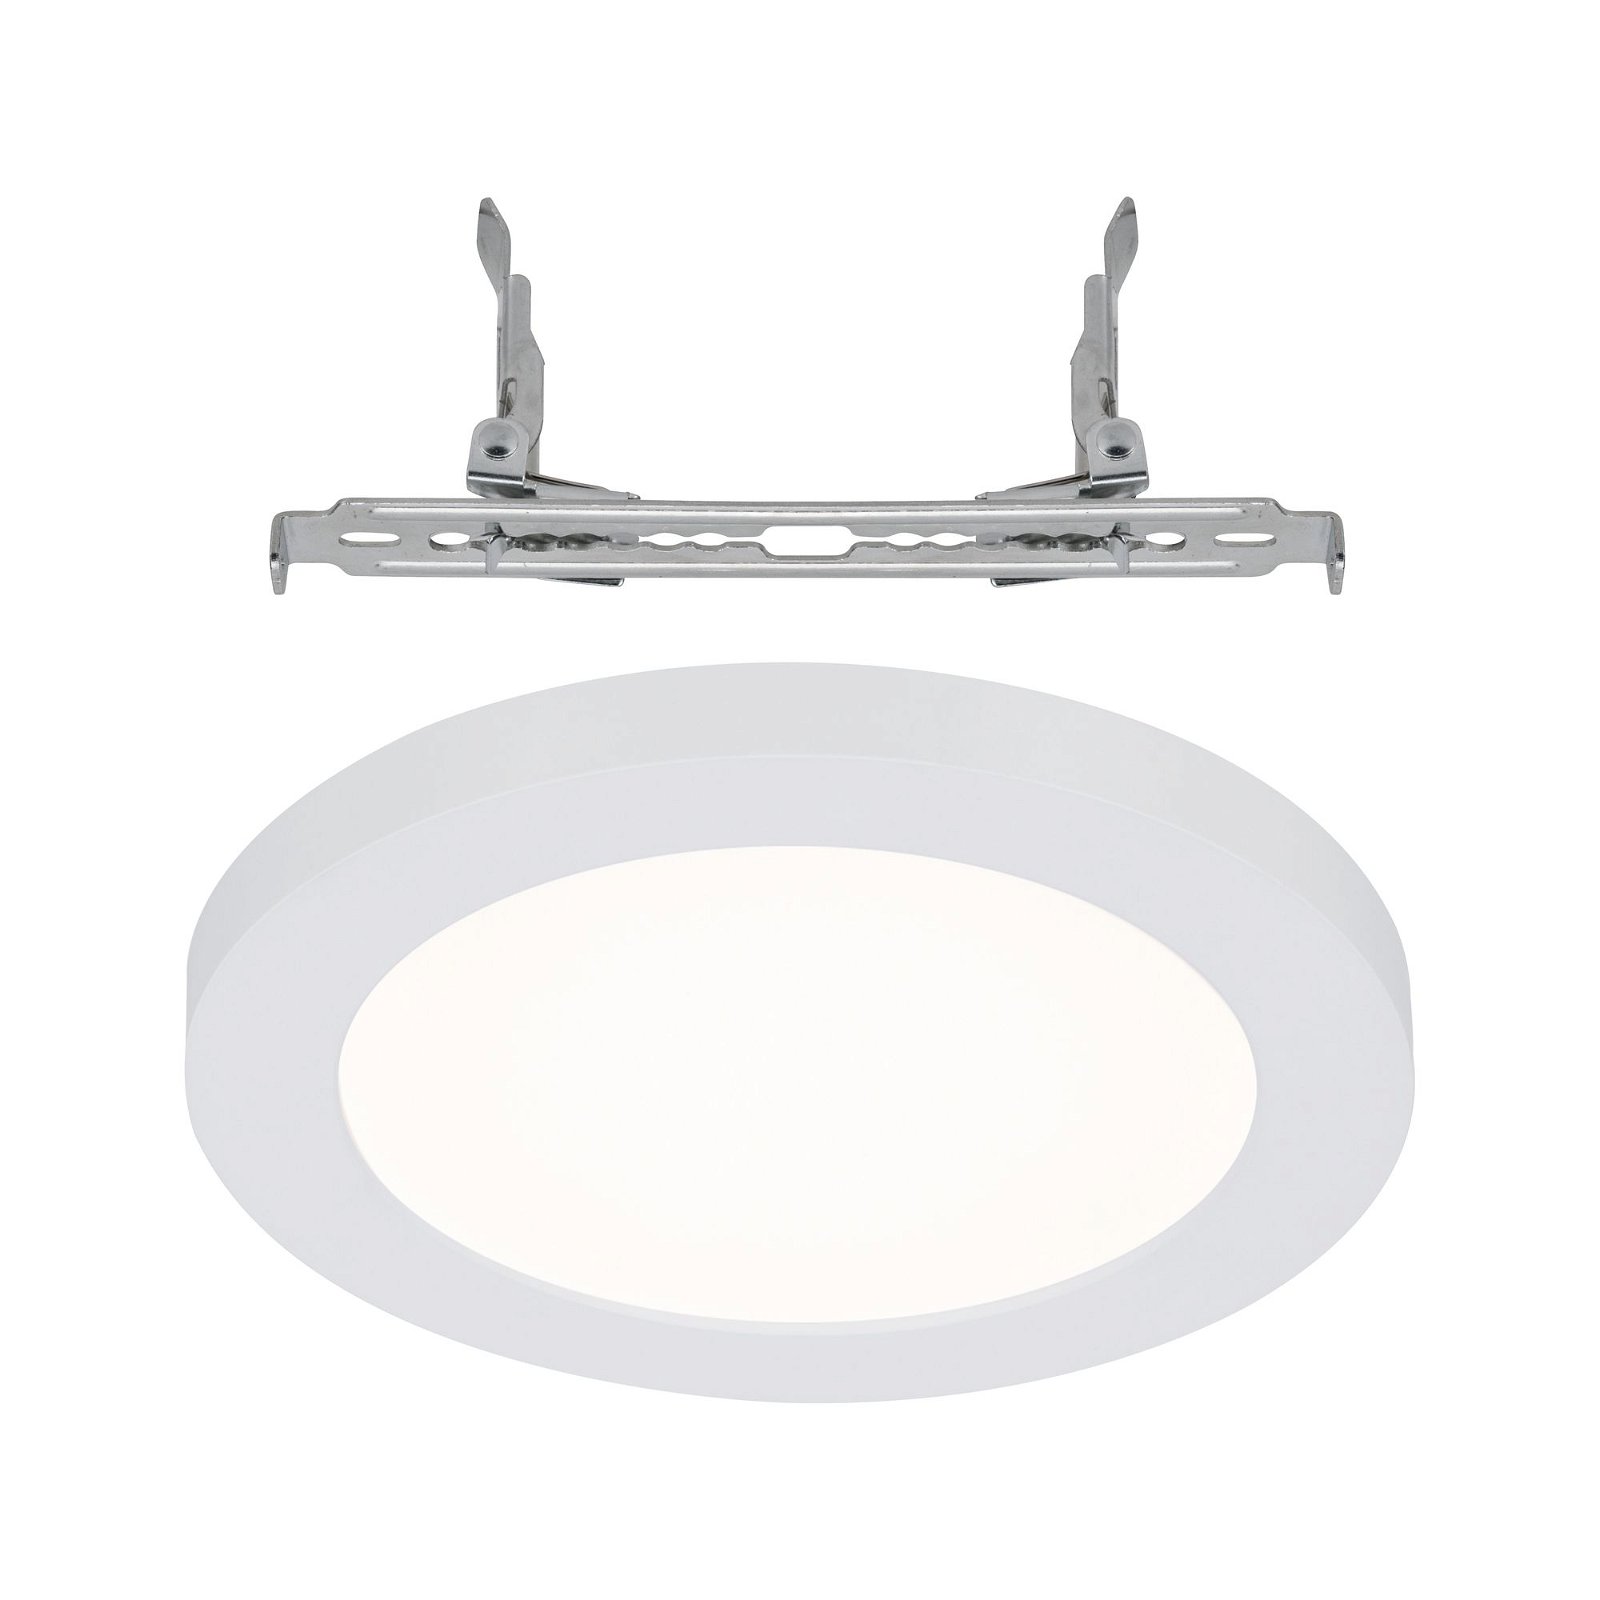 LED-inbouwpaneel Cover-it Promo rond 165mm 3000K Wit mat